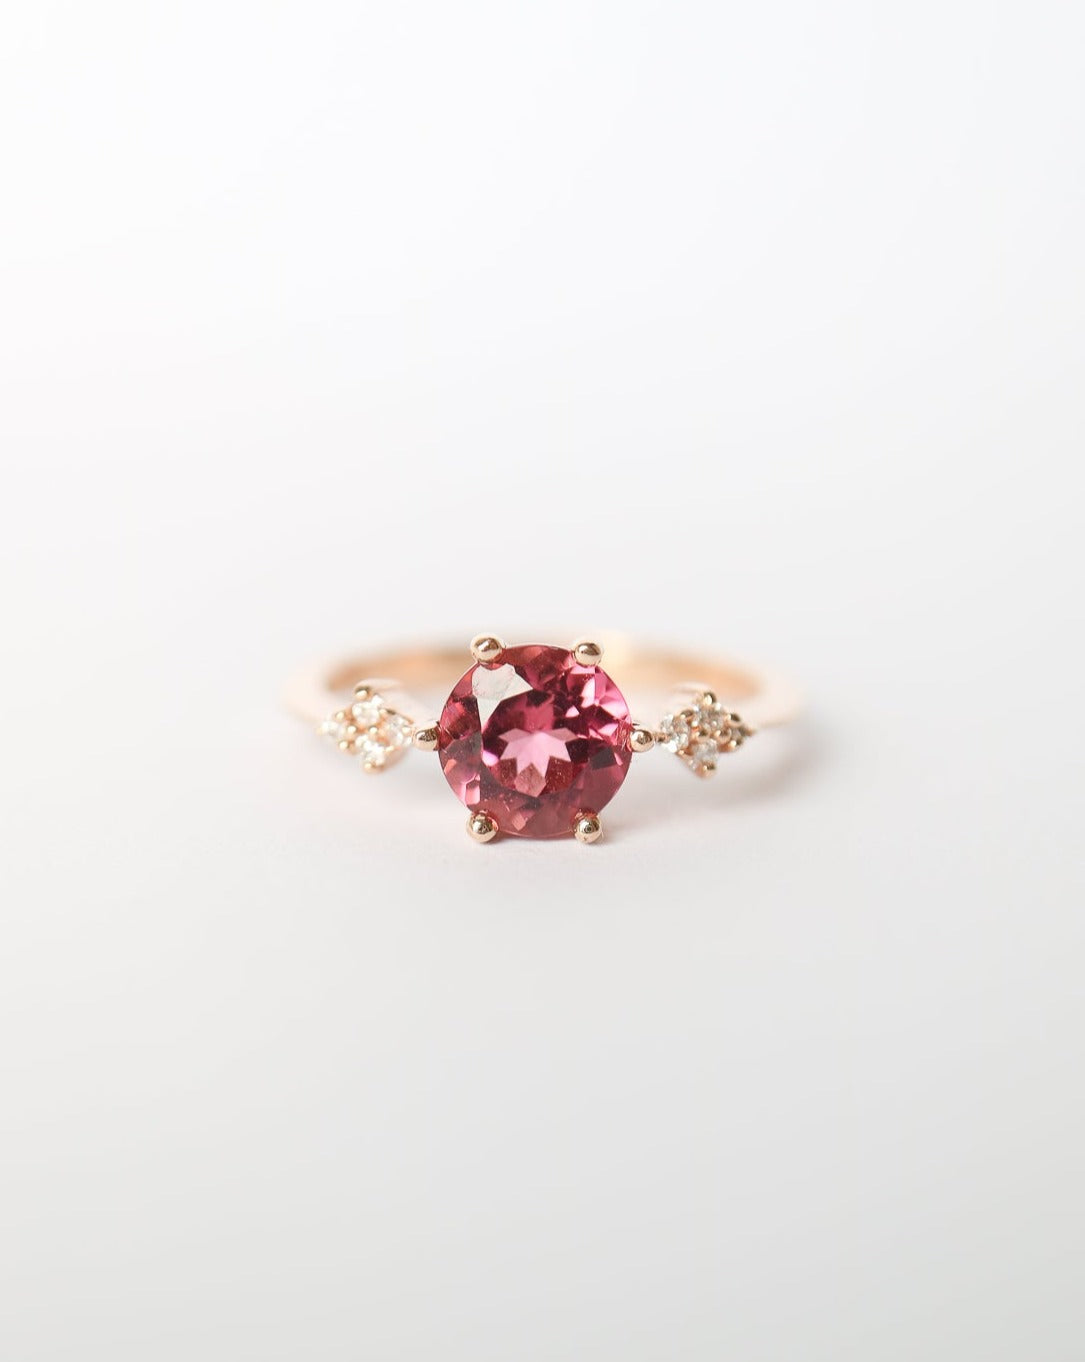 9kt rose gold engagement ring with pink tourmaline